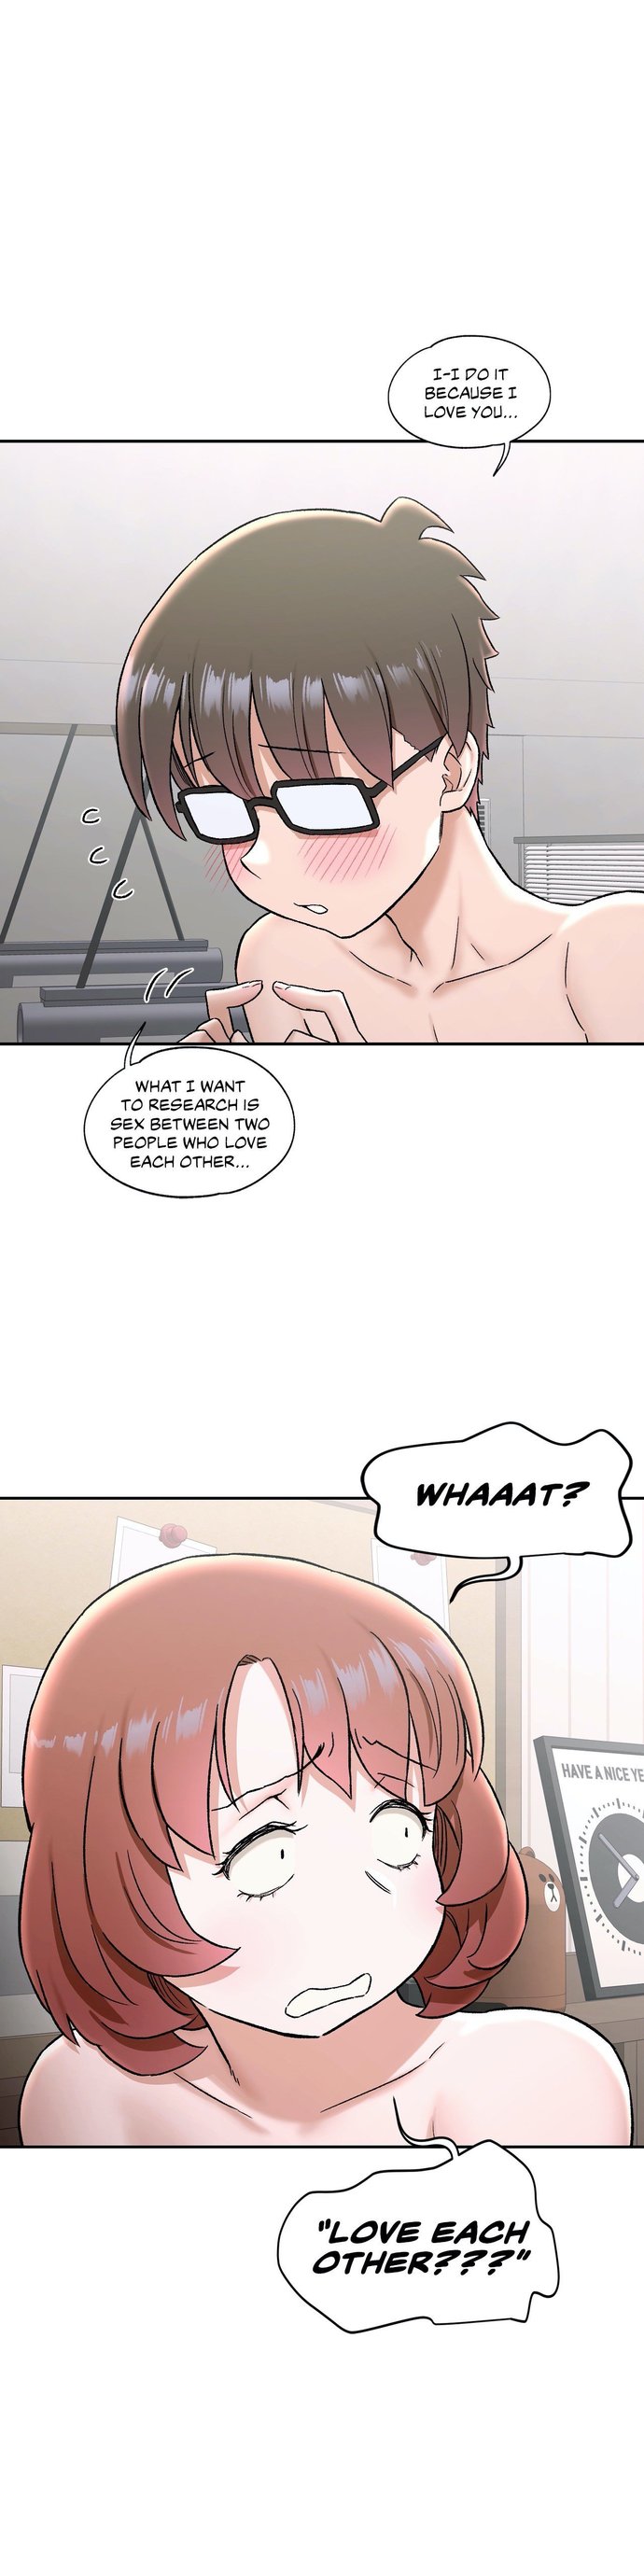 Sexercise - Chapter 68 Page 4